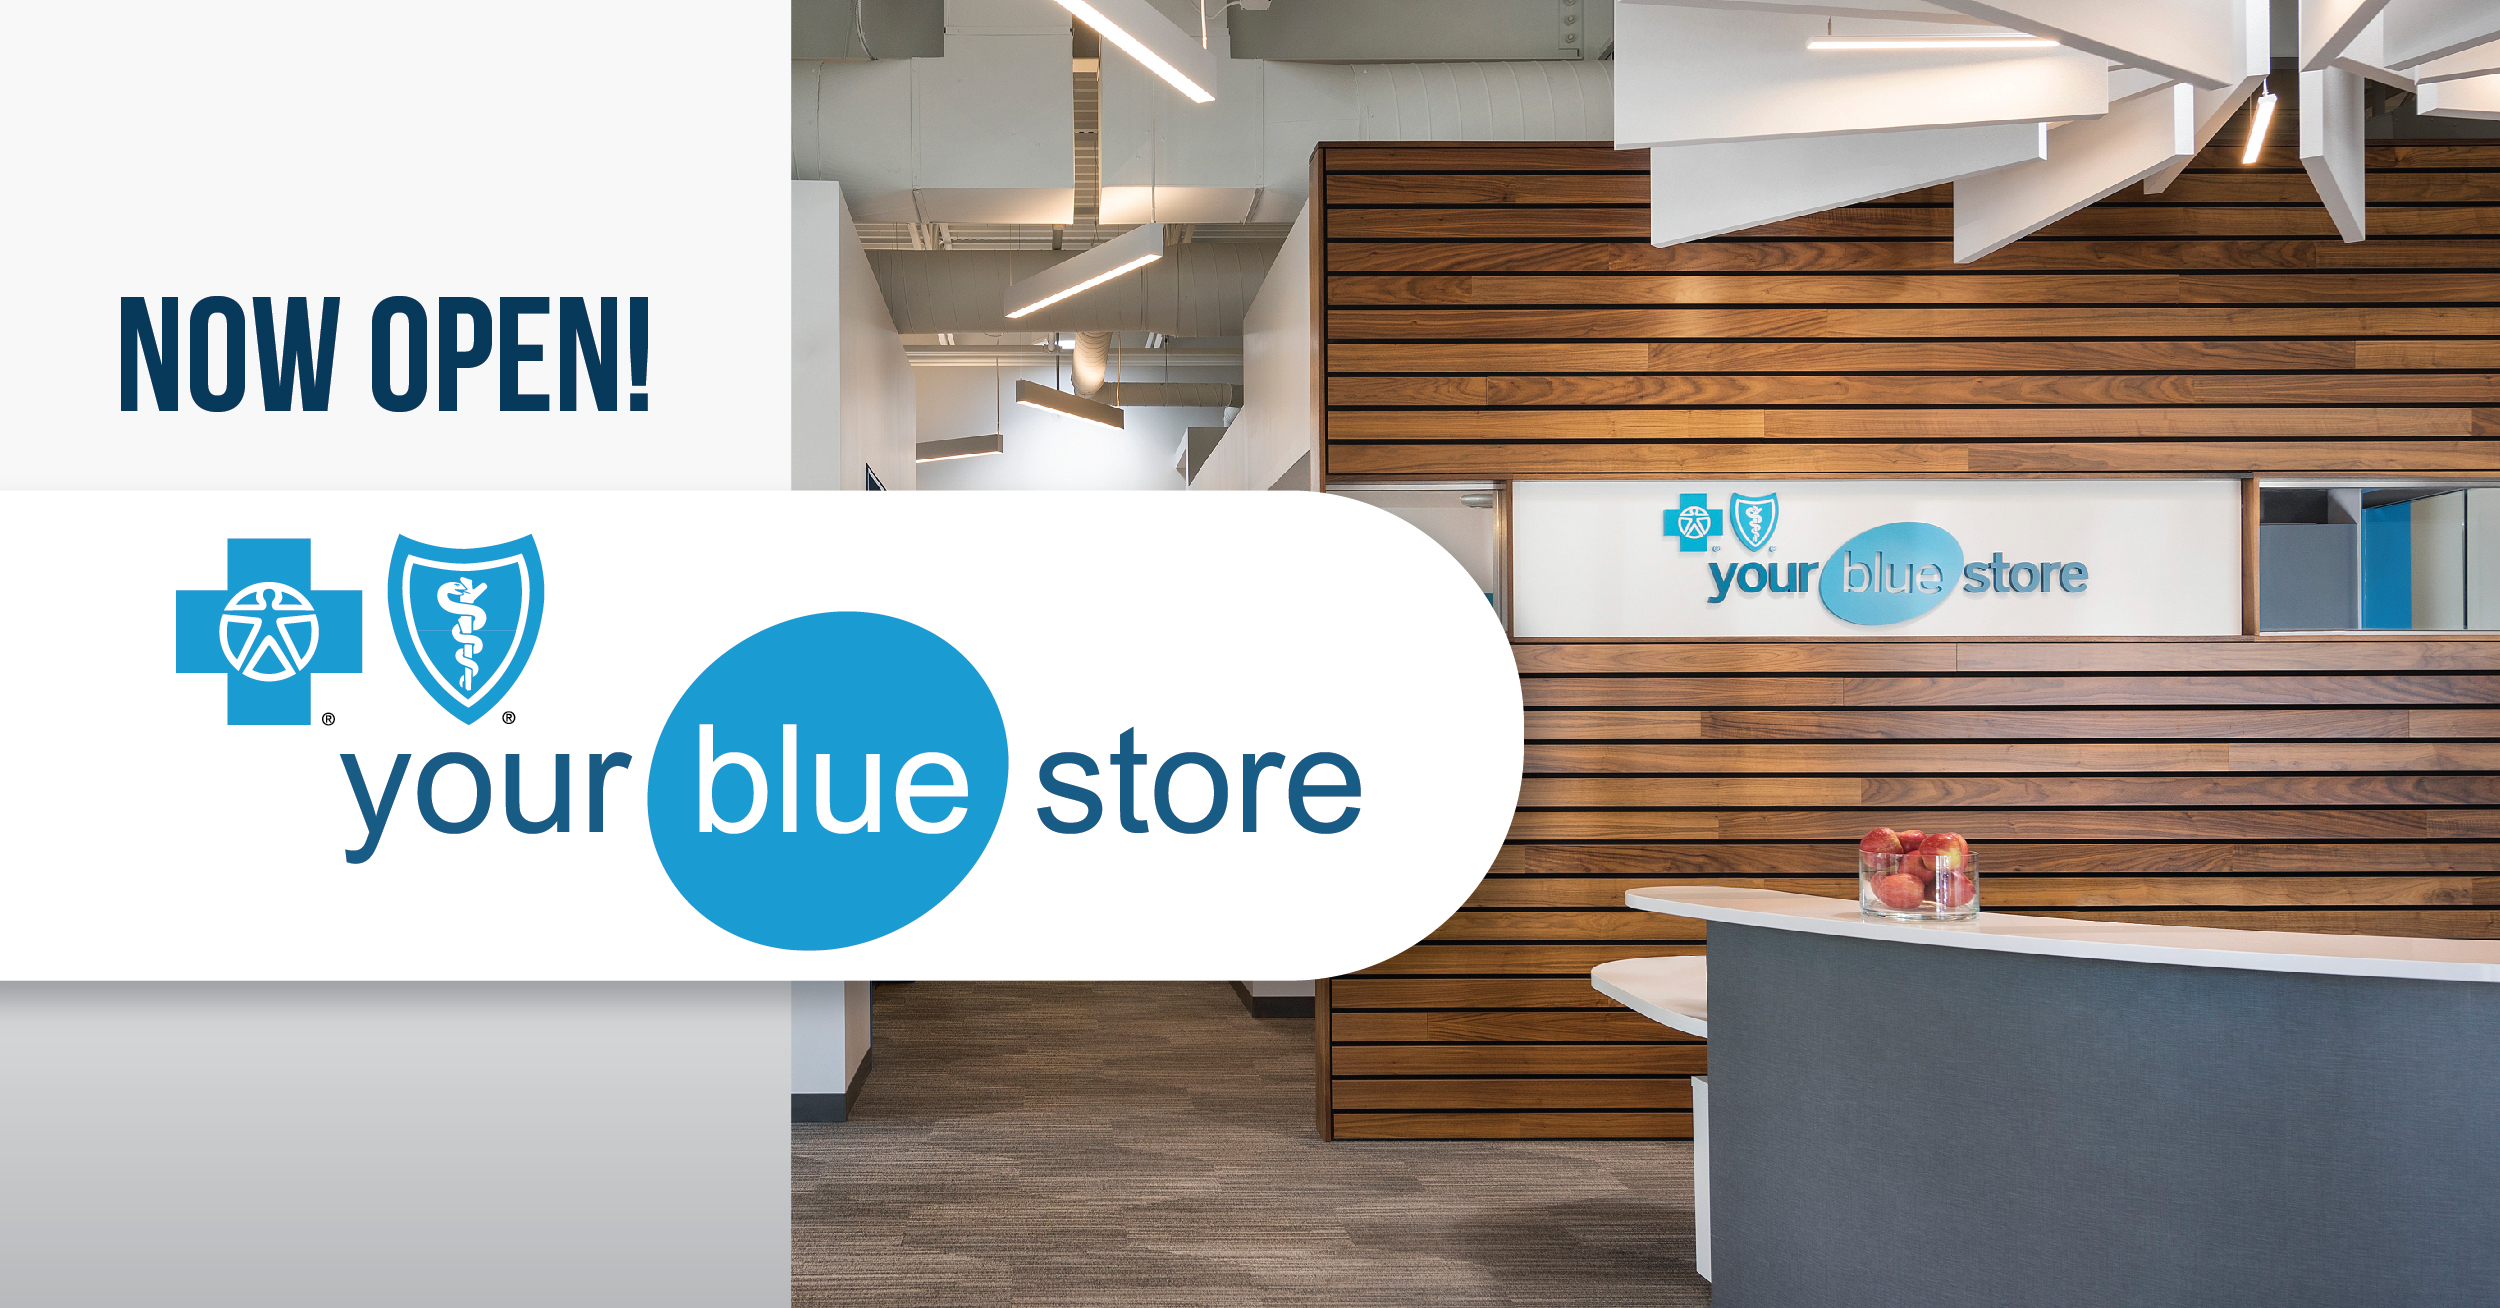 Now Open Your Blue Store